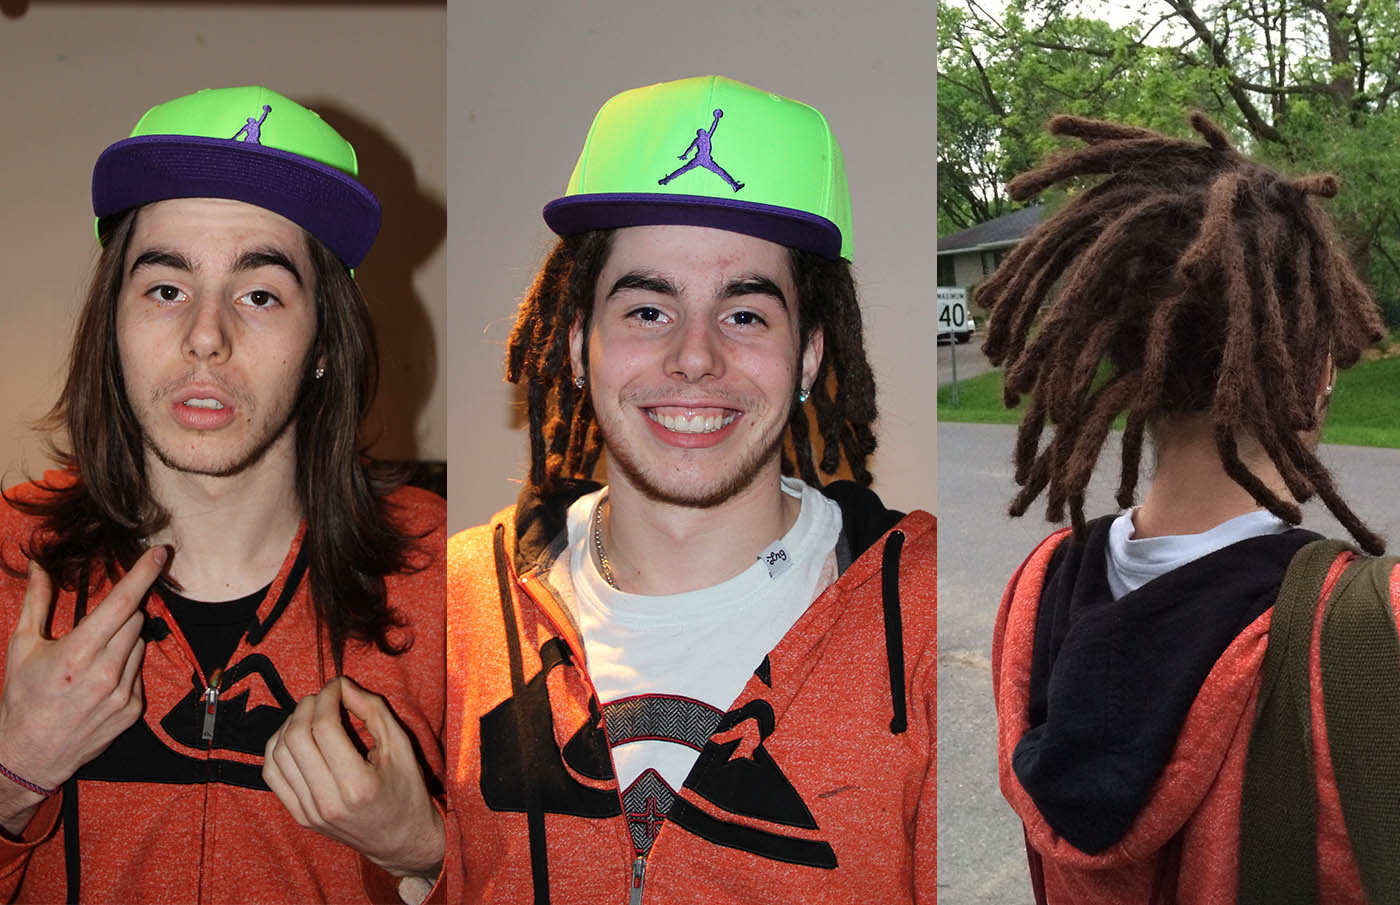 Dreads on a guy with long black hair with a Green Jordan hat. Before and After. White guy